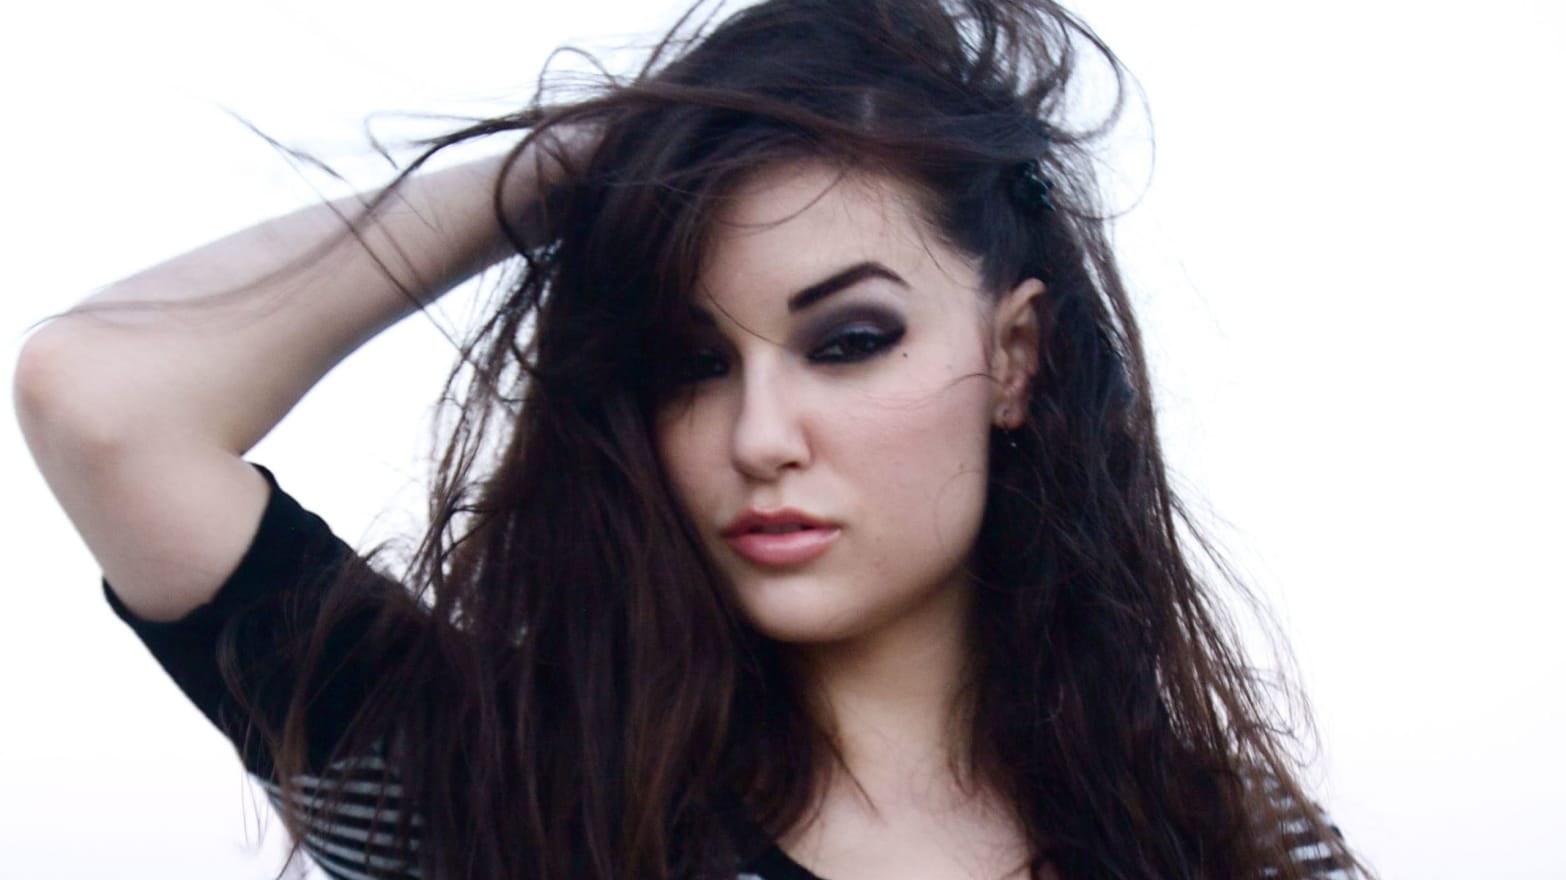 Hollywoods Favorite Ex-Porn Star: A Chat With Sasha Grey